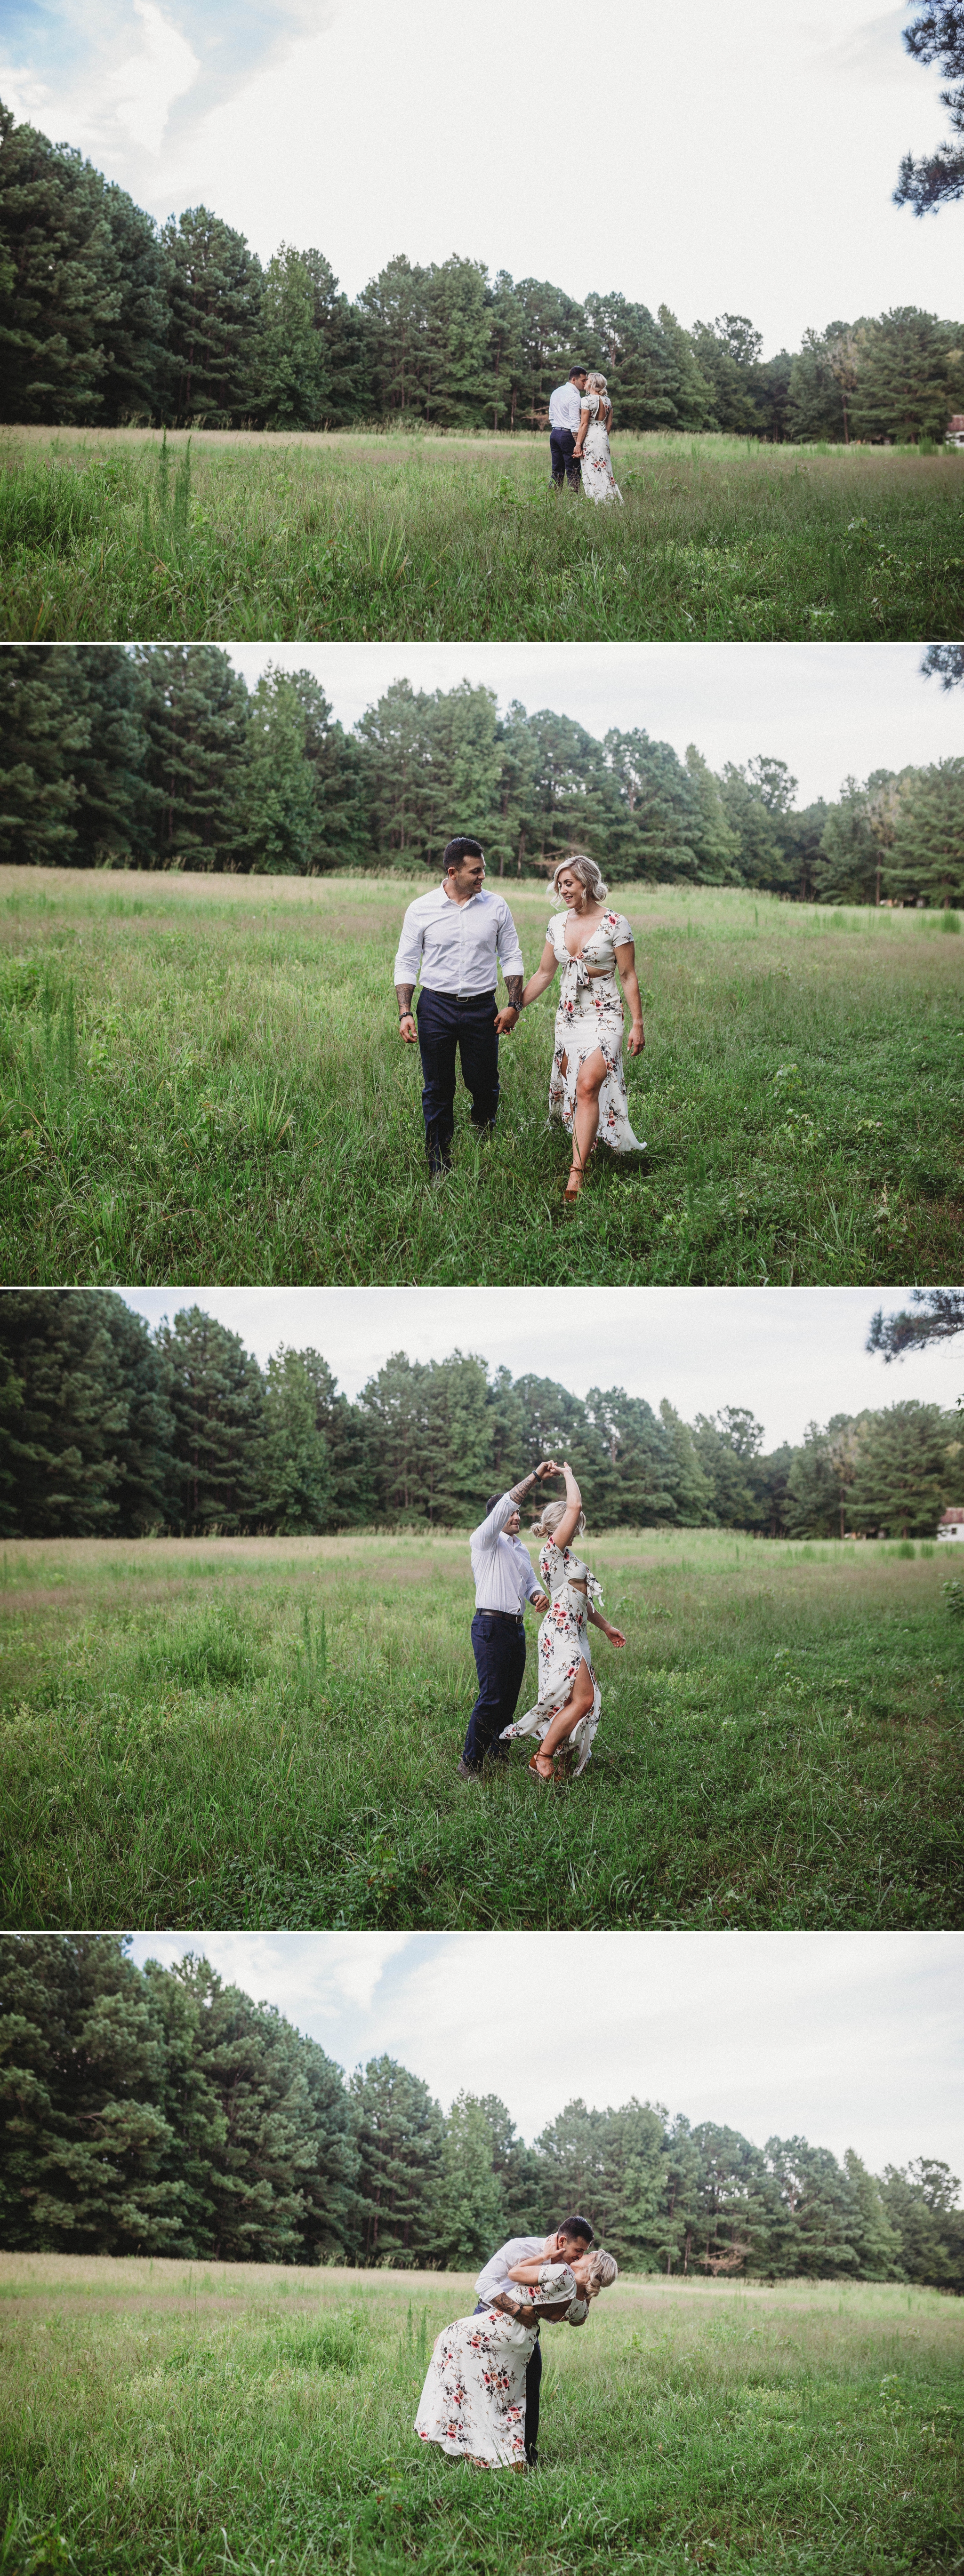 Cassie + Jesse - Engagement Photography Session in a field - Fayetteville North Carolina Wedding Photographer 7.jpg